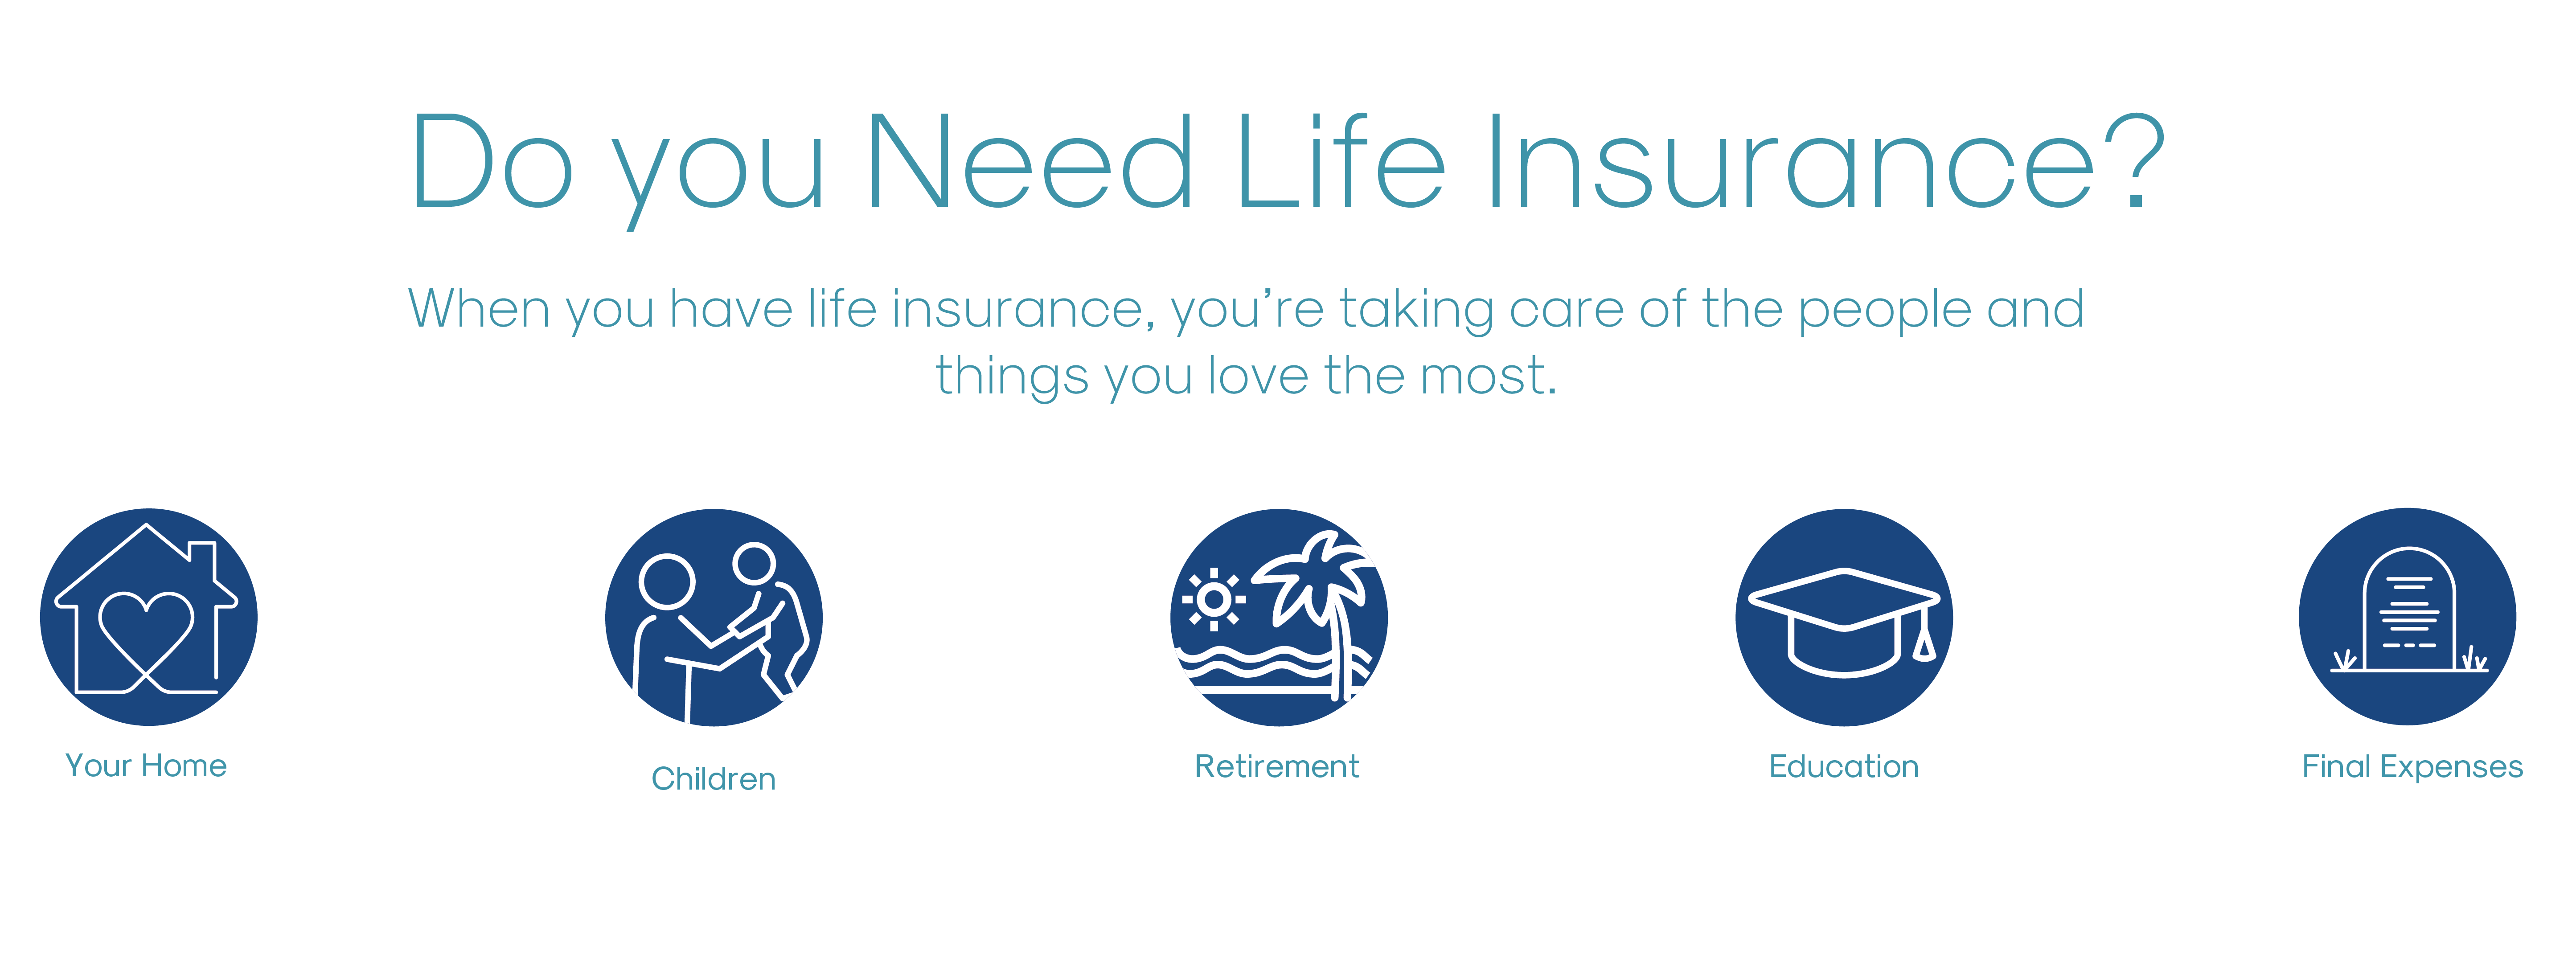 Icons on how life insurance can help your home, children, retirement, education, final expenses